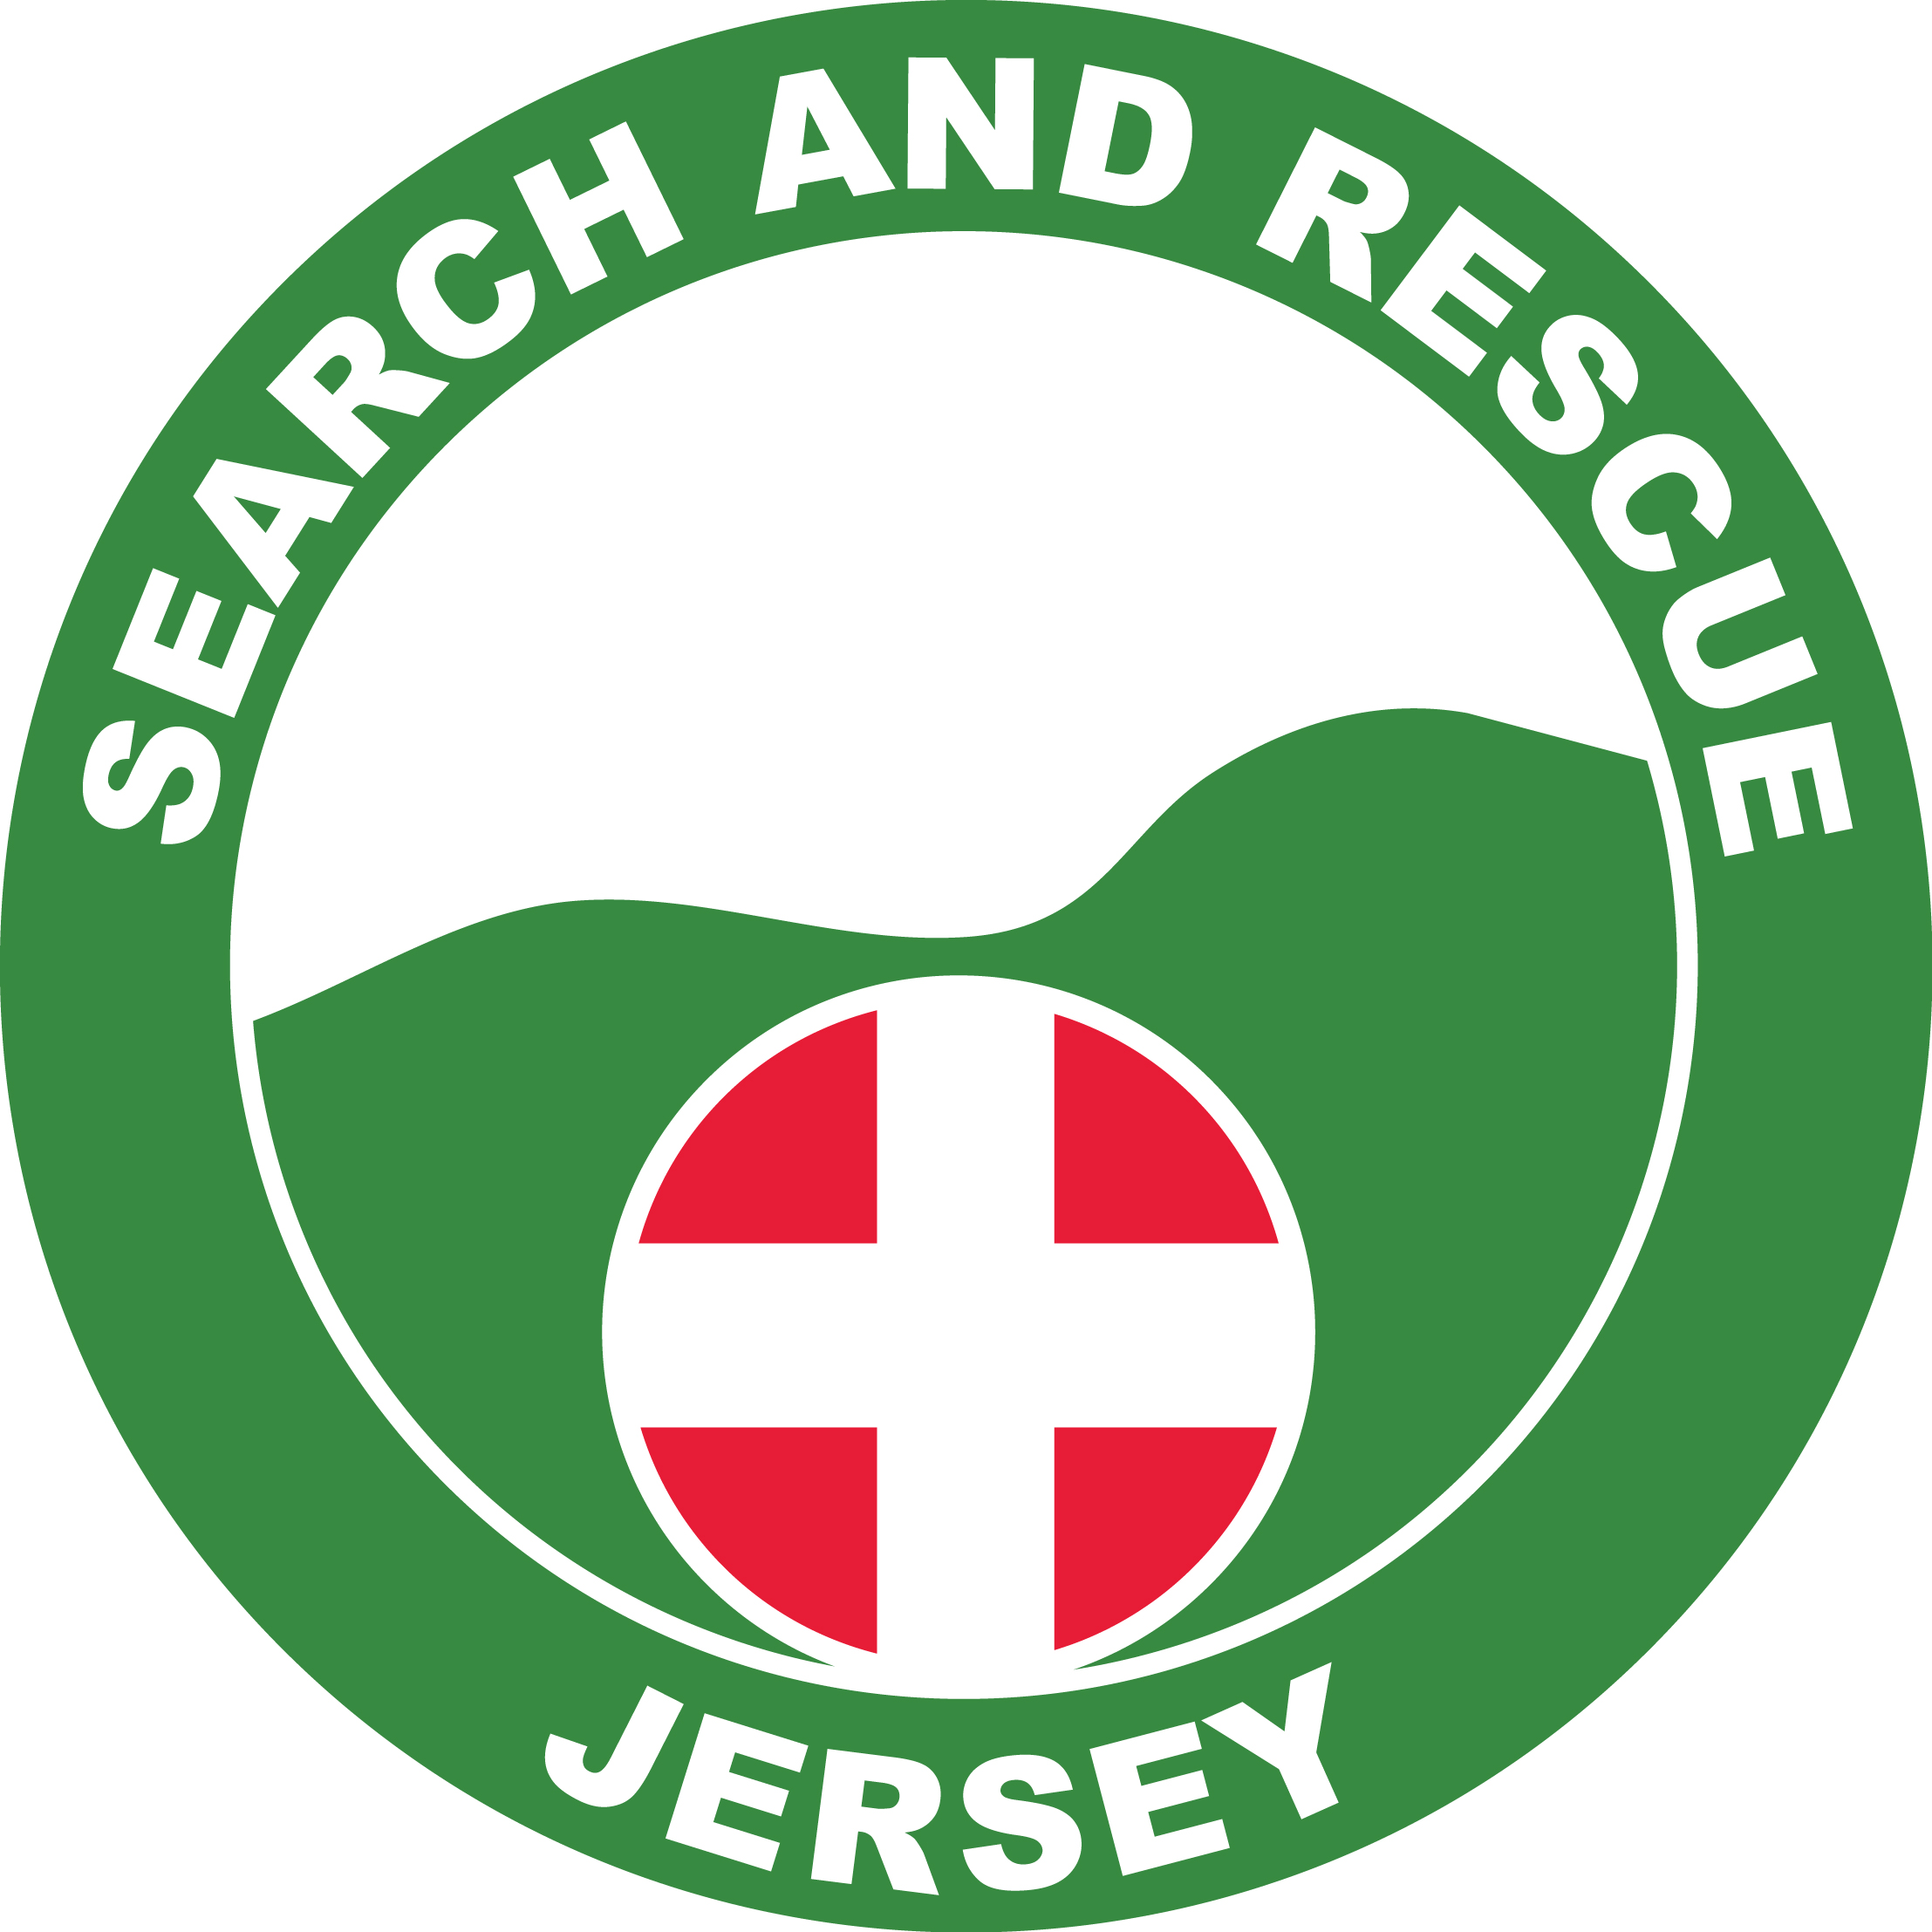 Jersey Search and Rescue